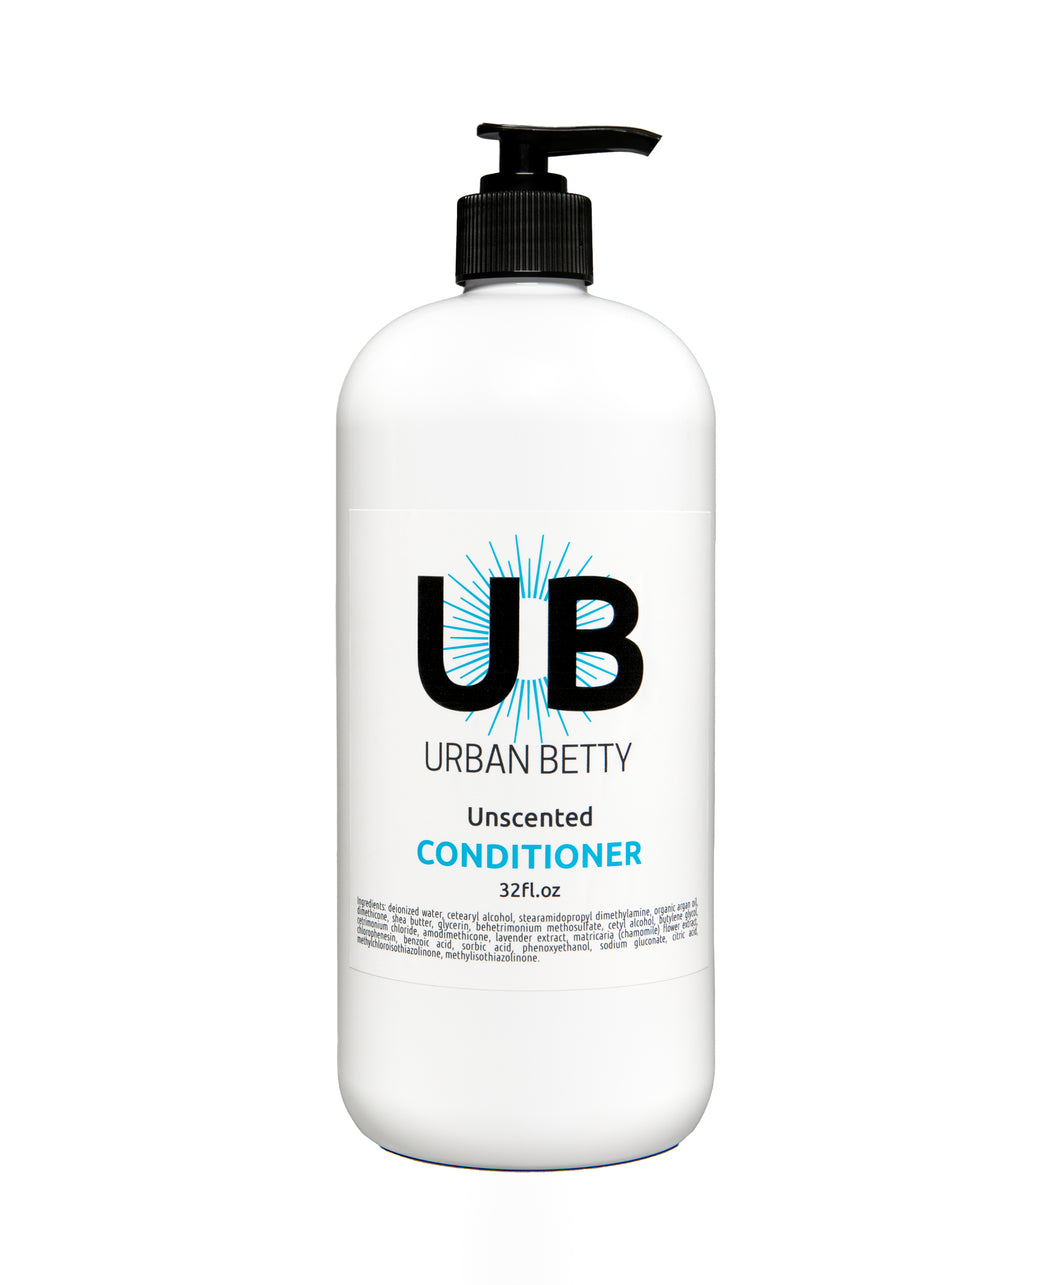 Urban Betty Unscented Conditioner - 32oz Back Bar Pro Size